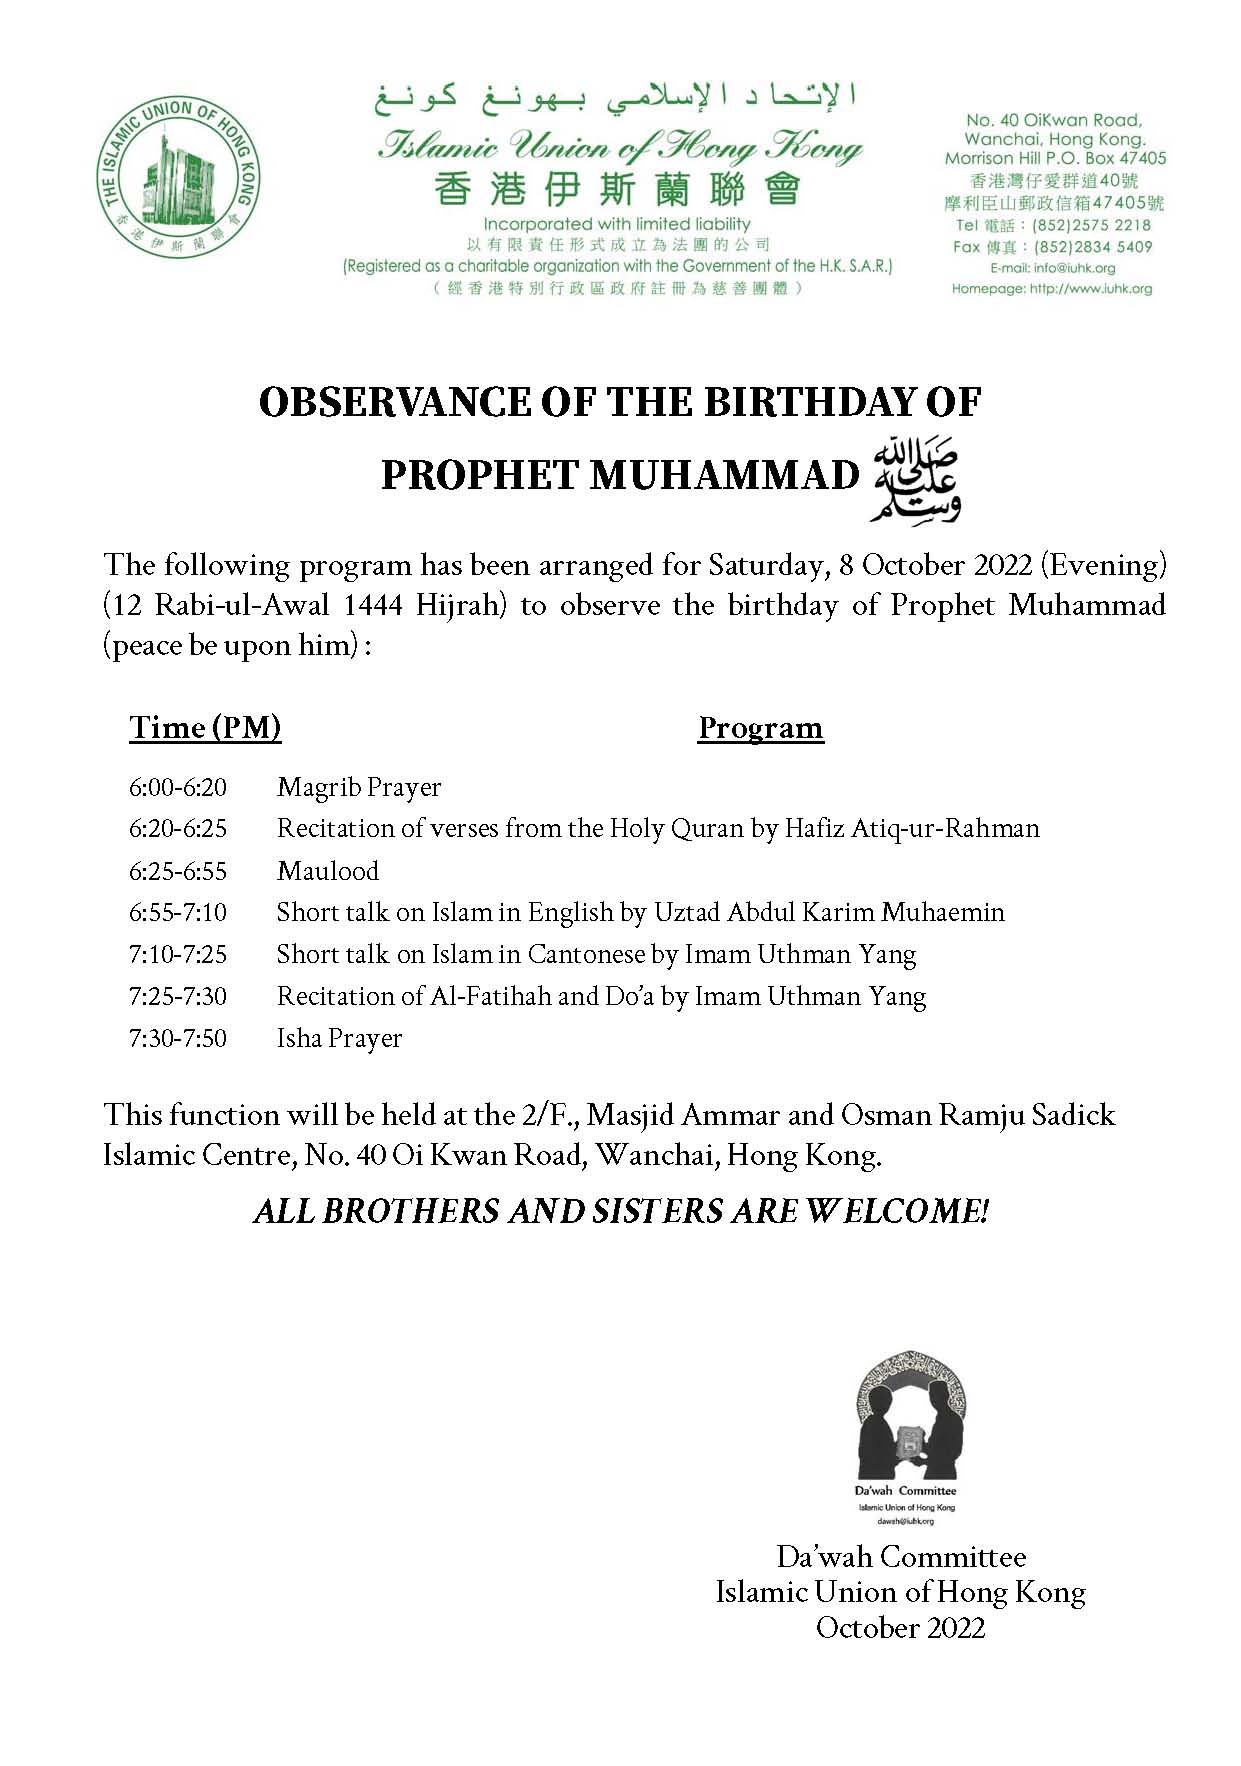 Observance of the birthday of Prophet Muhammad (peace be upon him) 2022